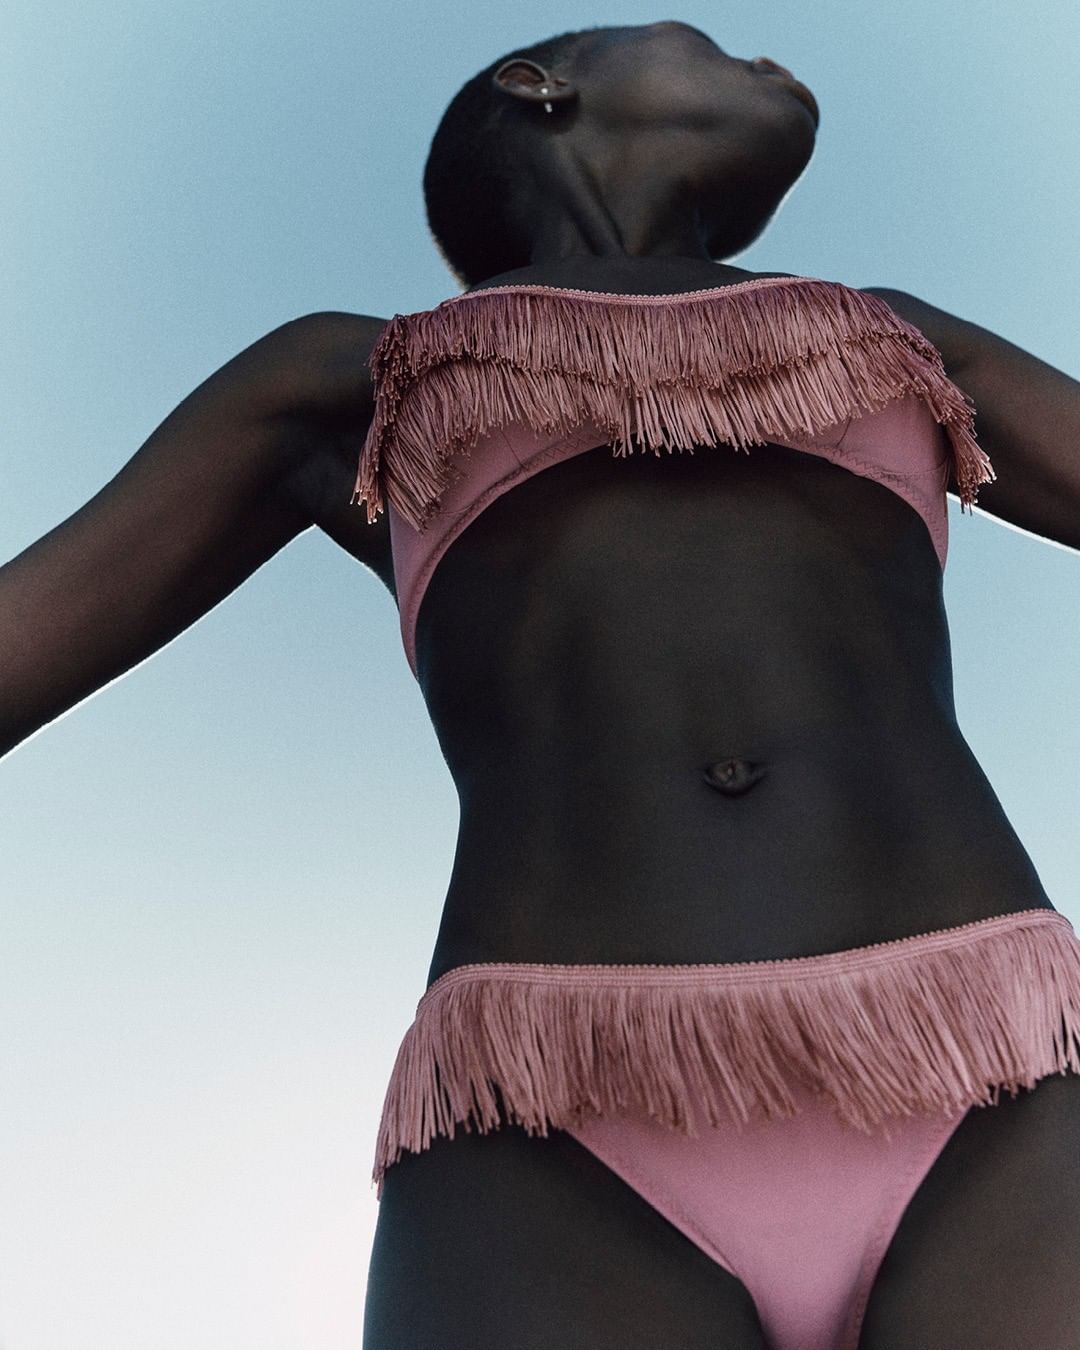 Stella McCartney - Making a splash wherever you find sunlit serenity, at home or on holiday, our Autumn Winter 2020 collection includes archive-inspired Fringes bikini tops and briefs made contemporar...